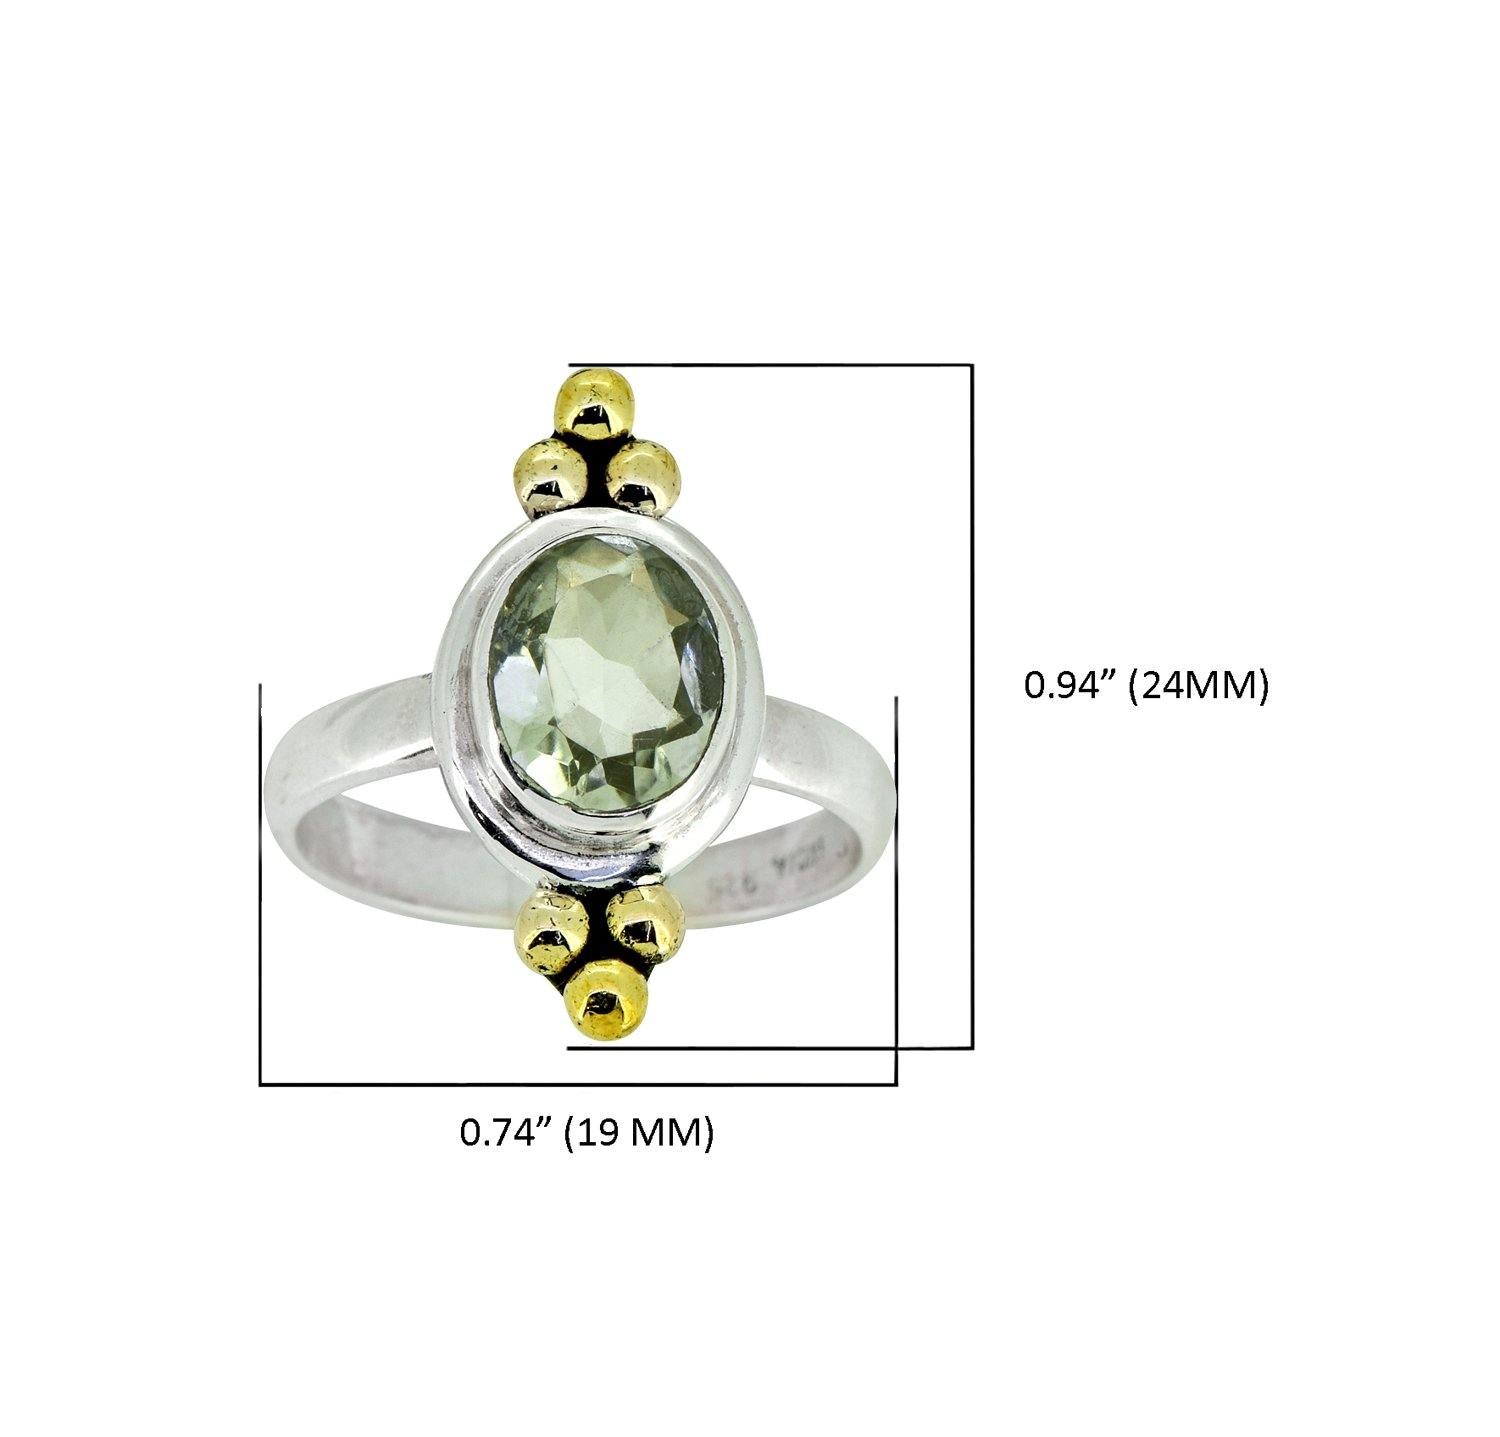 Green Amethyst Solid 925 Sterling Silver Brass Ring Jewelry - YoTreasure